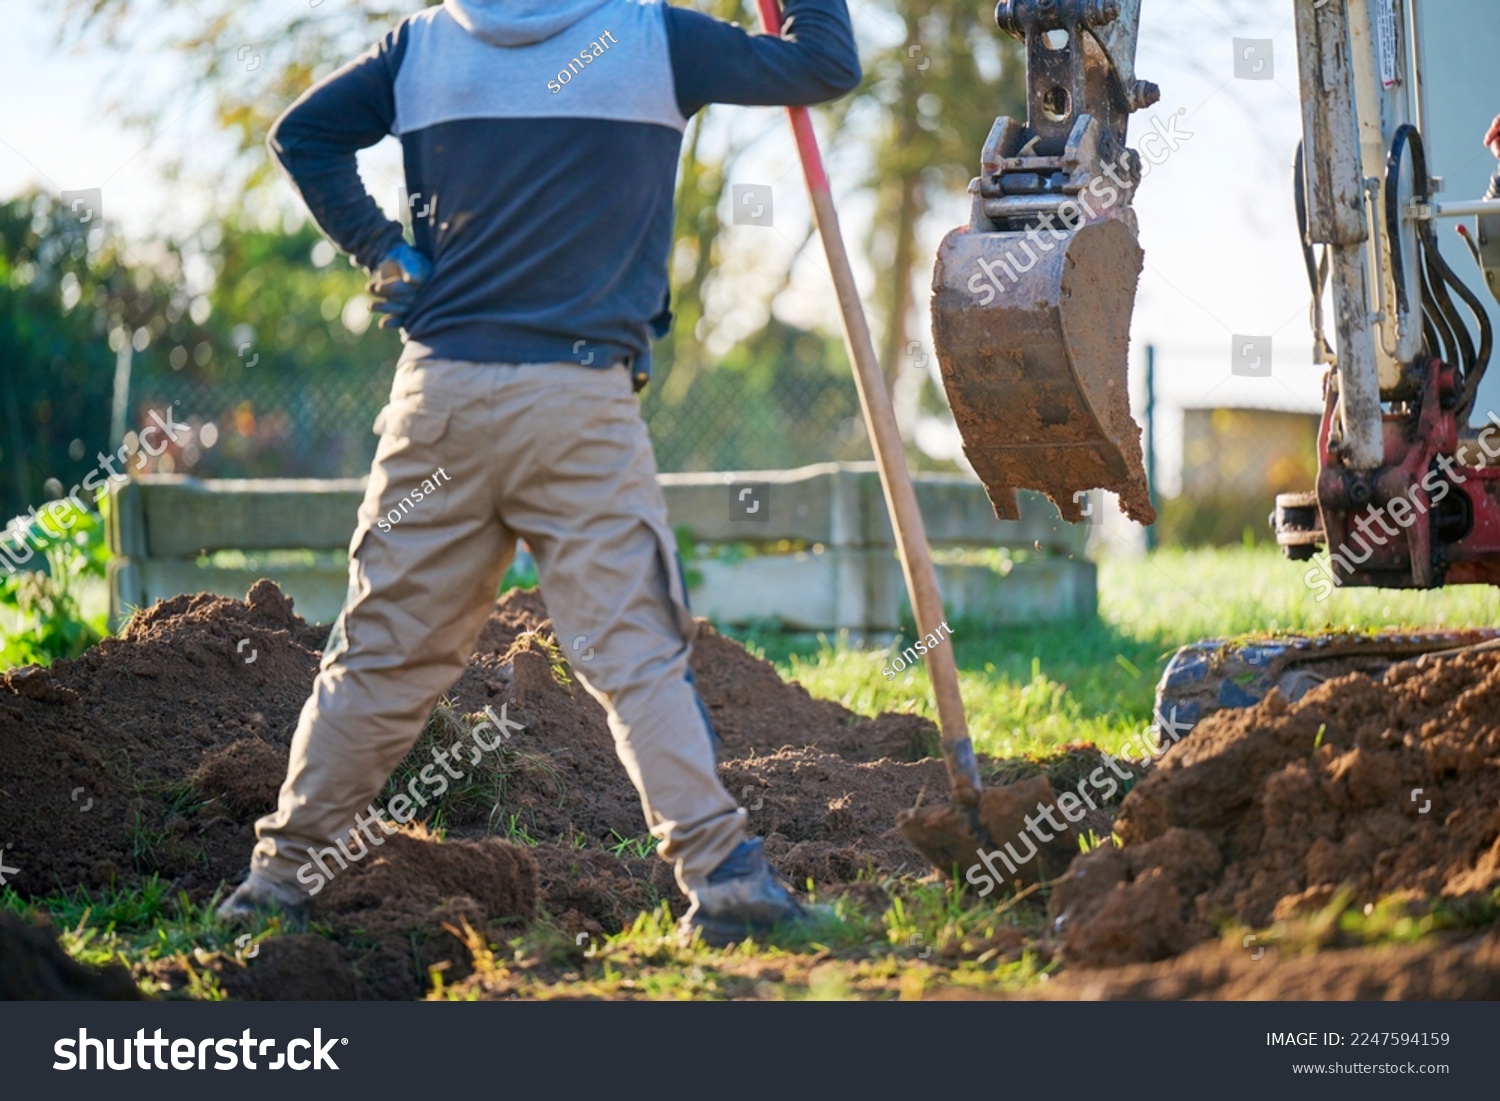 Construction worker in construction site.
Construction worker standing and watching bucket digger digging trench. #2247594159